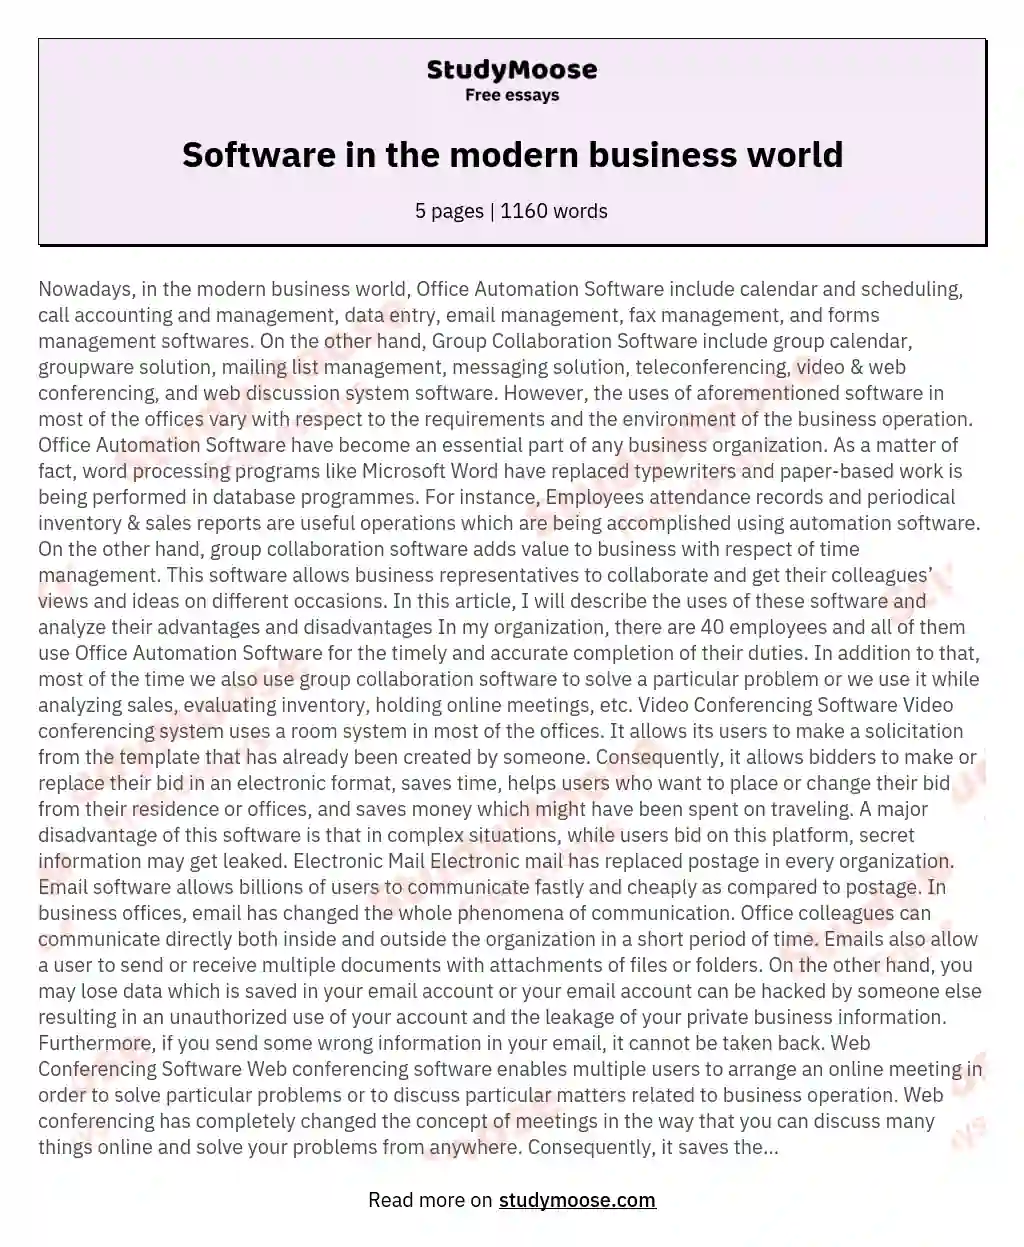 Software in the modern business world essay